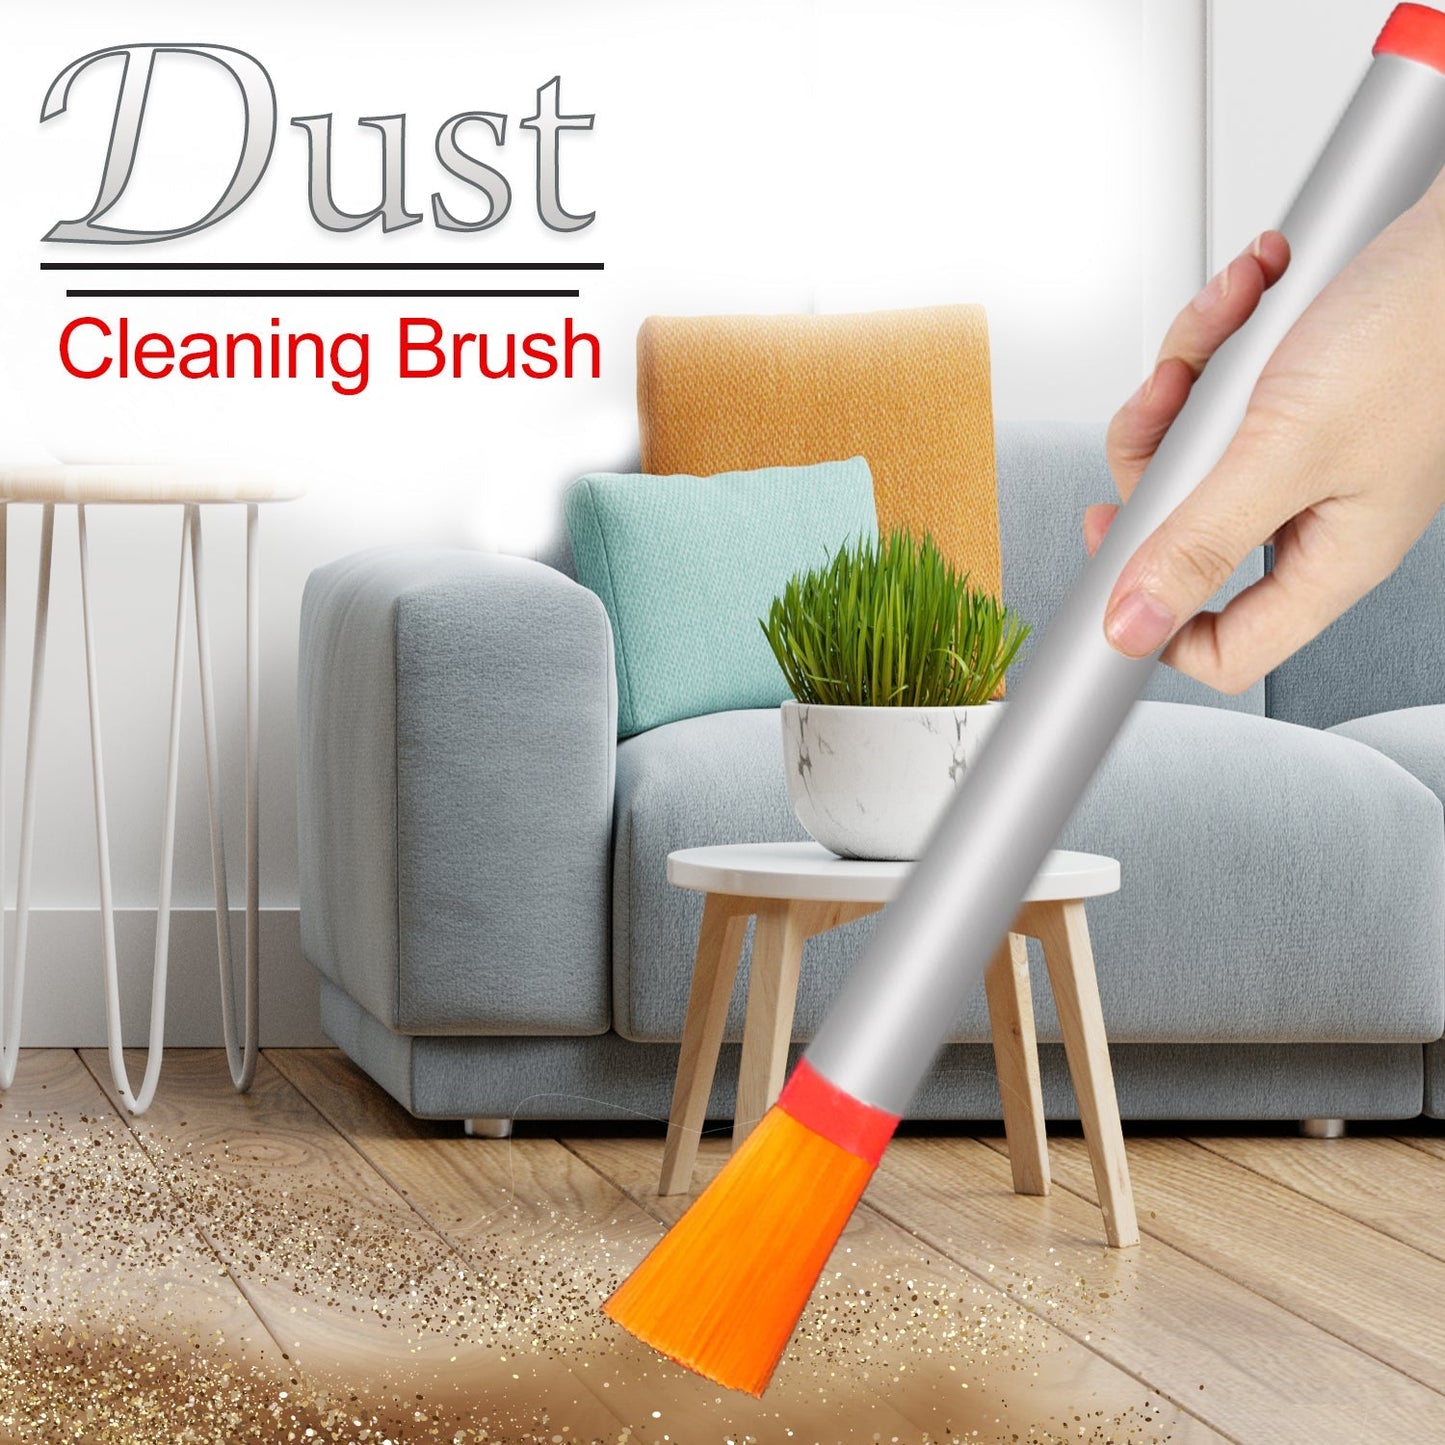 2487 Dust Cleaning Brush for Deep Cleansteel bodyperfect size DeoDap